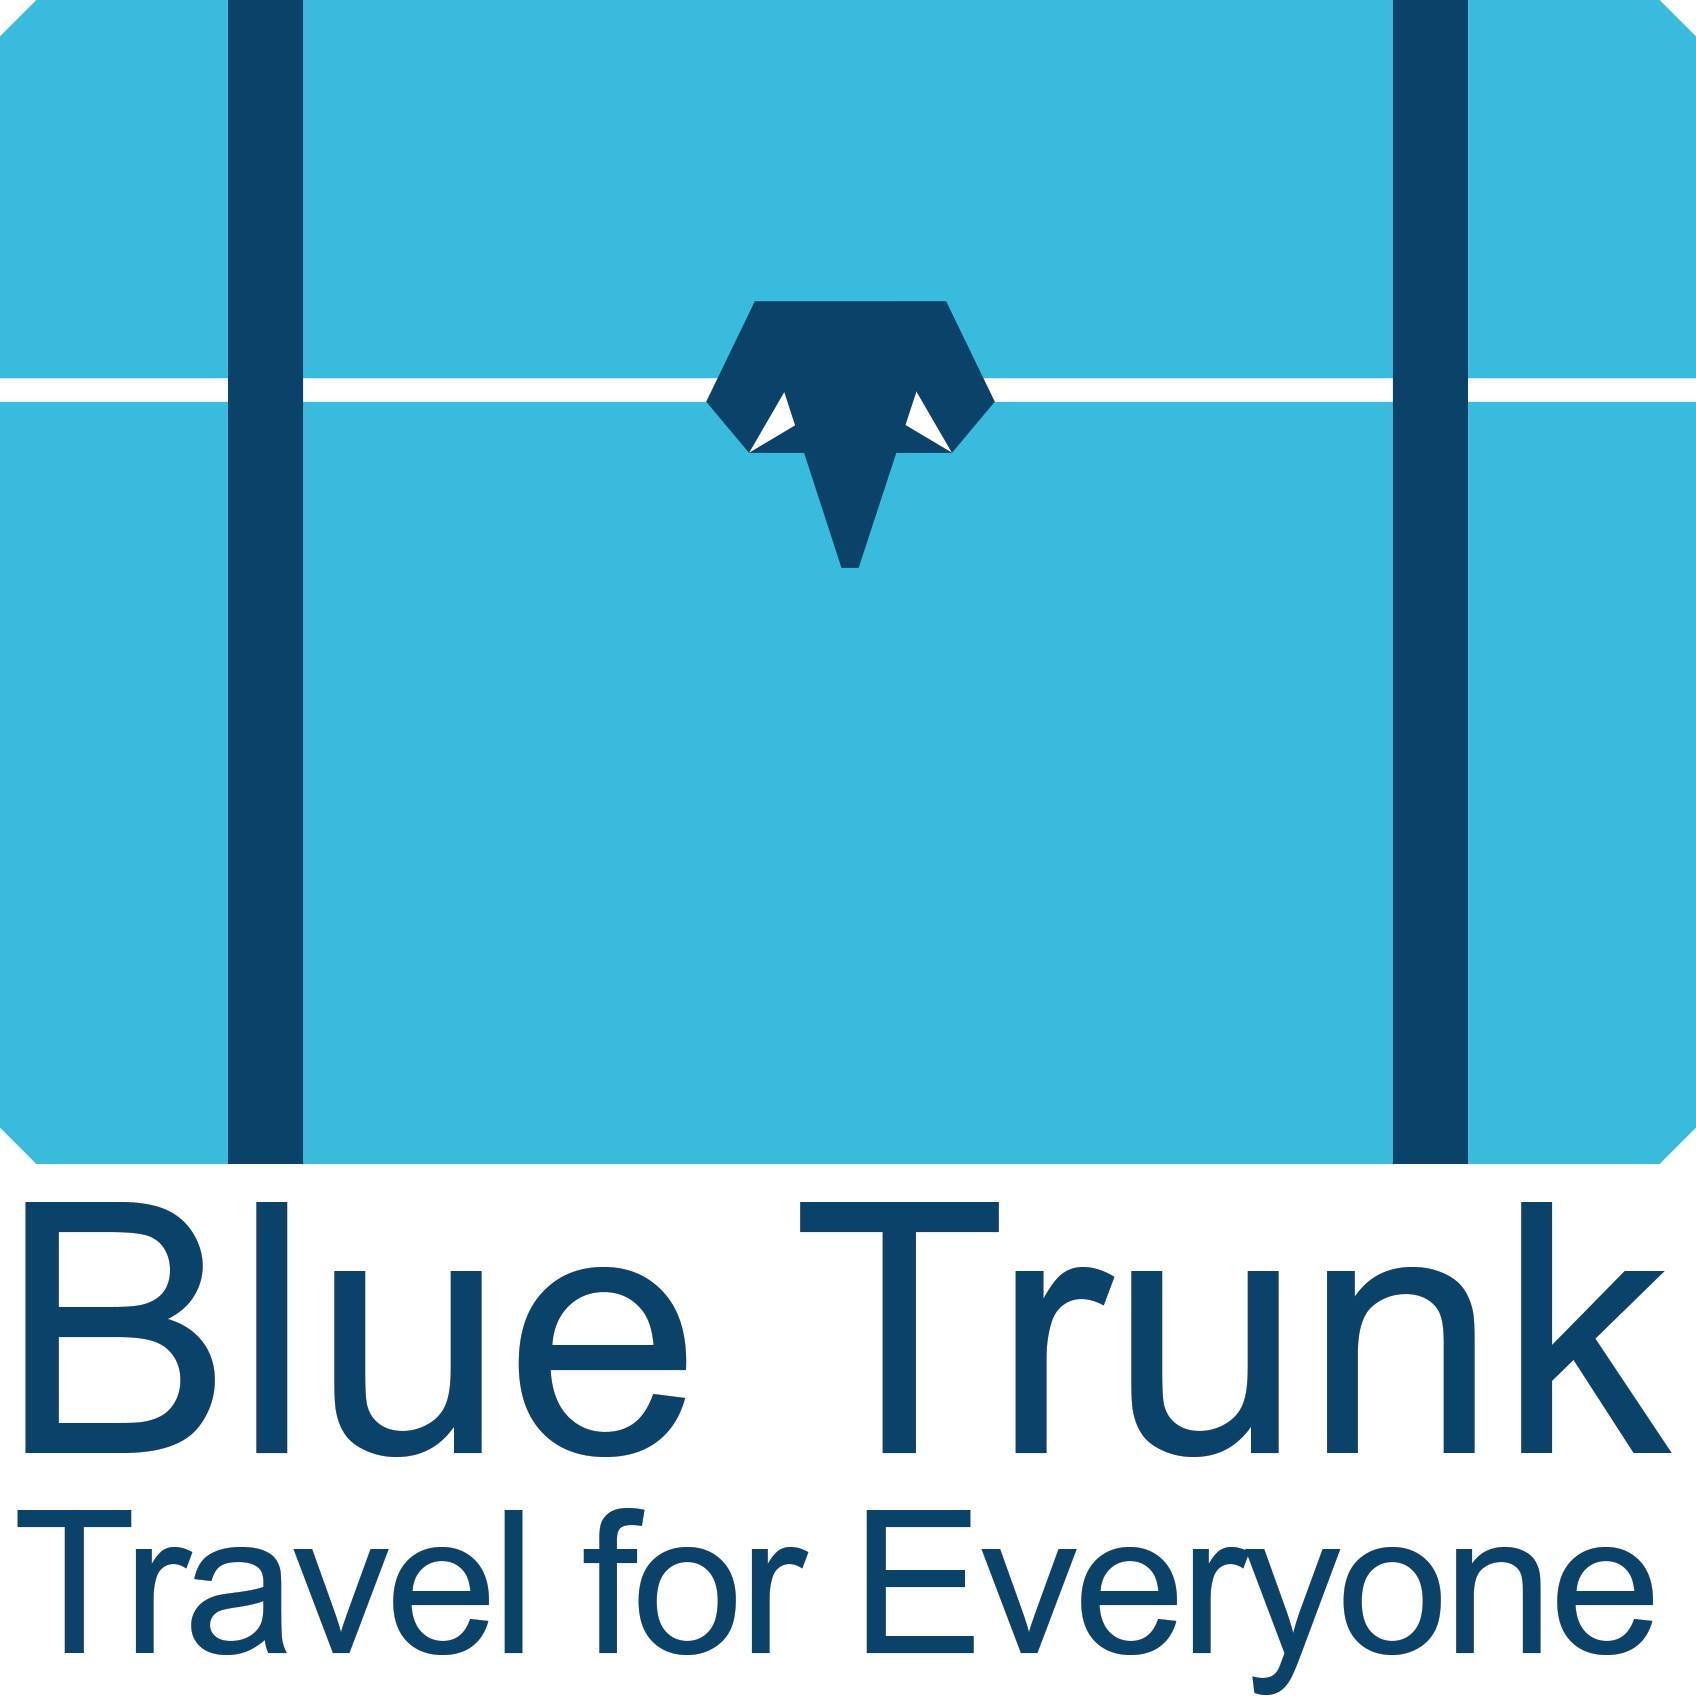 blue and white text logo